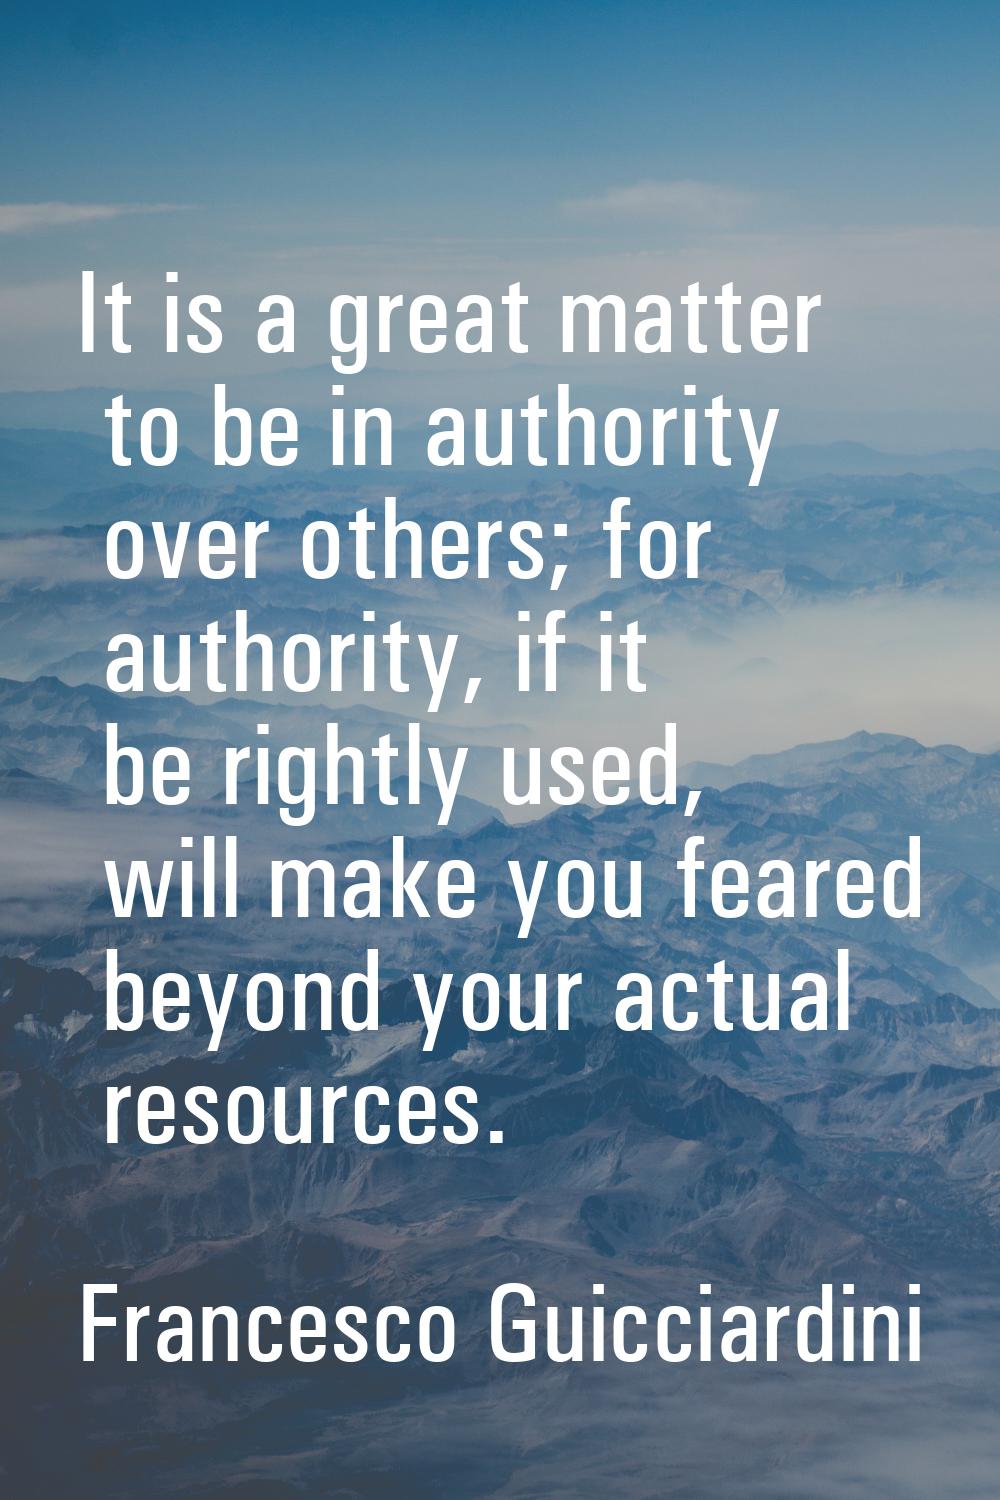 It is a great matter to be in authority over others; for authority, if it be rightly used, will mak